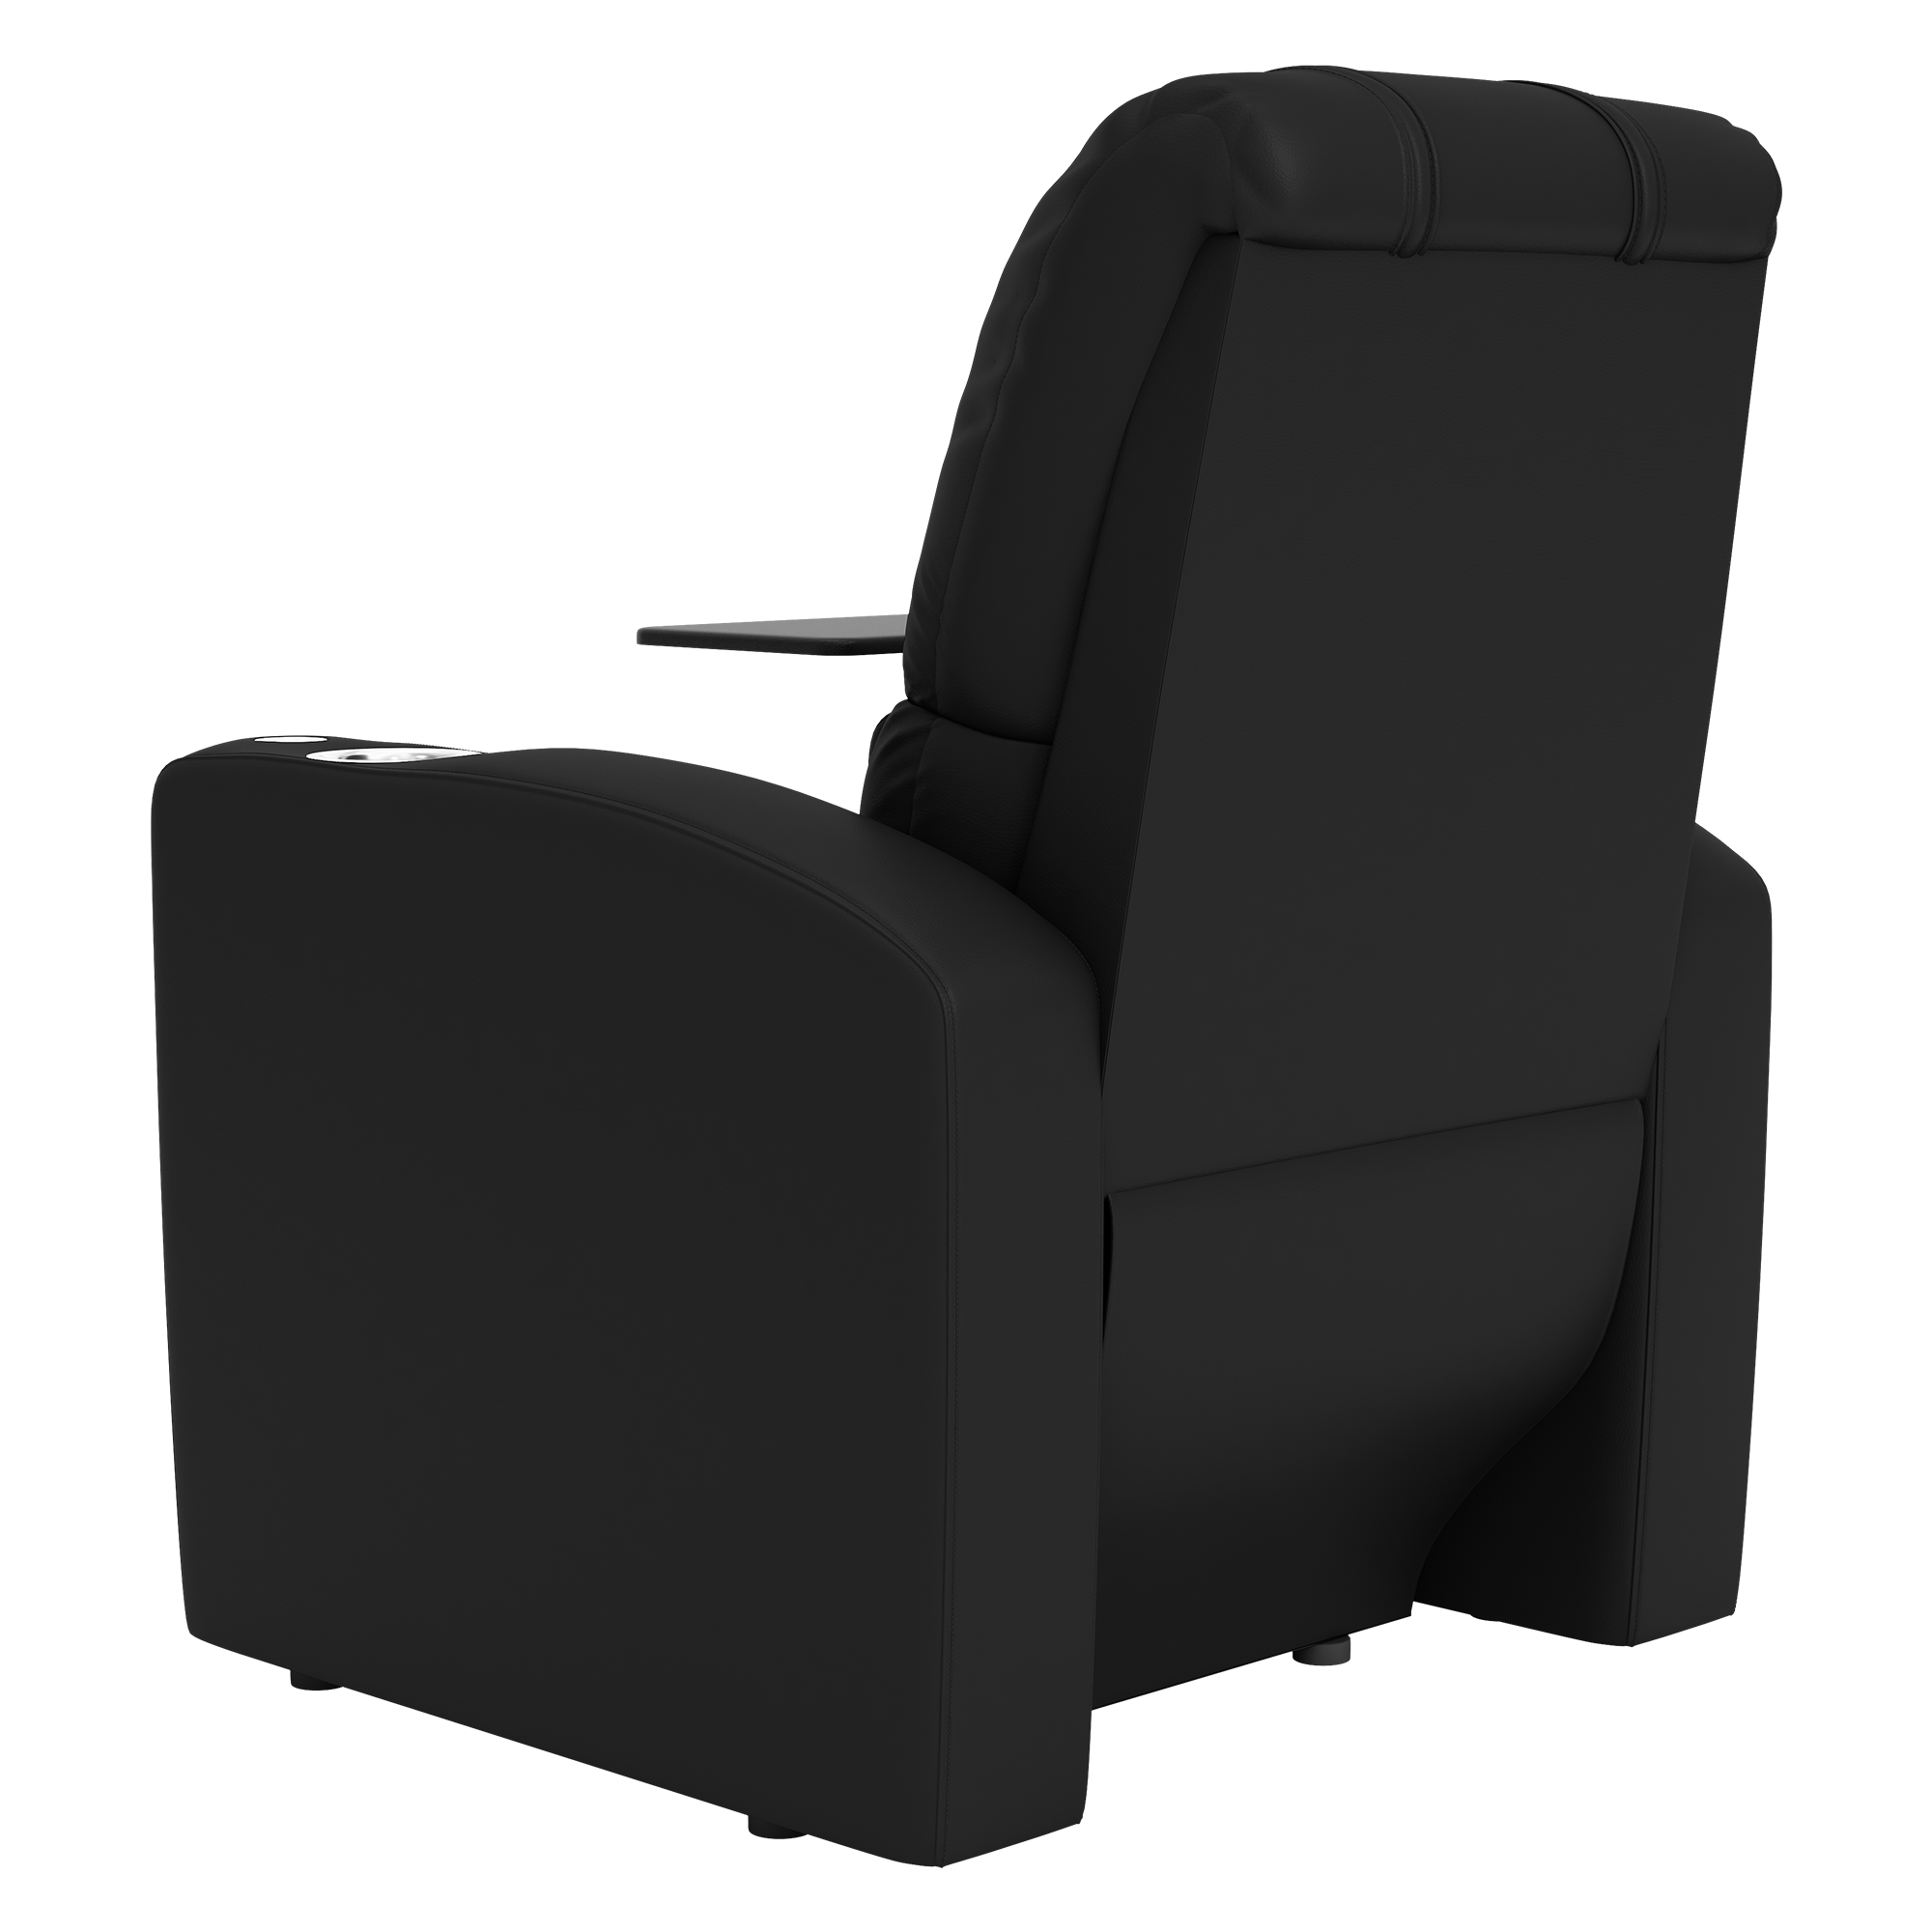 Stealth Power Plus Recliner with Jacksonville Jaguars Secondary Logo